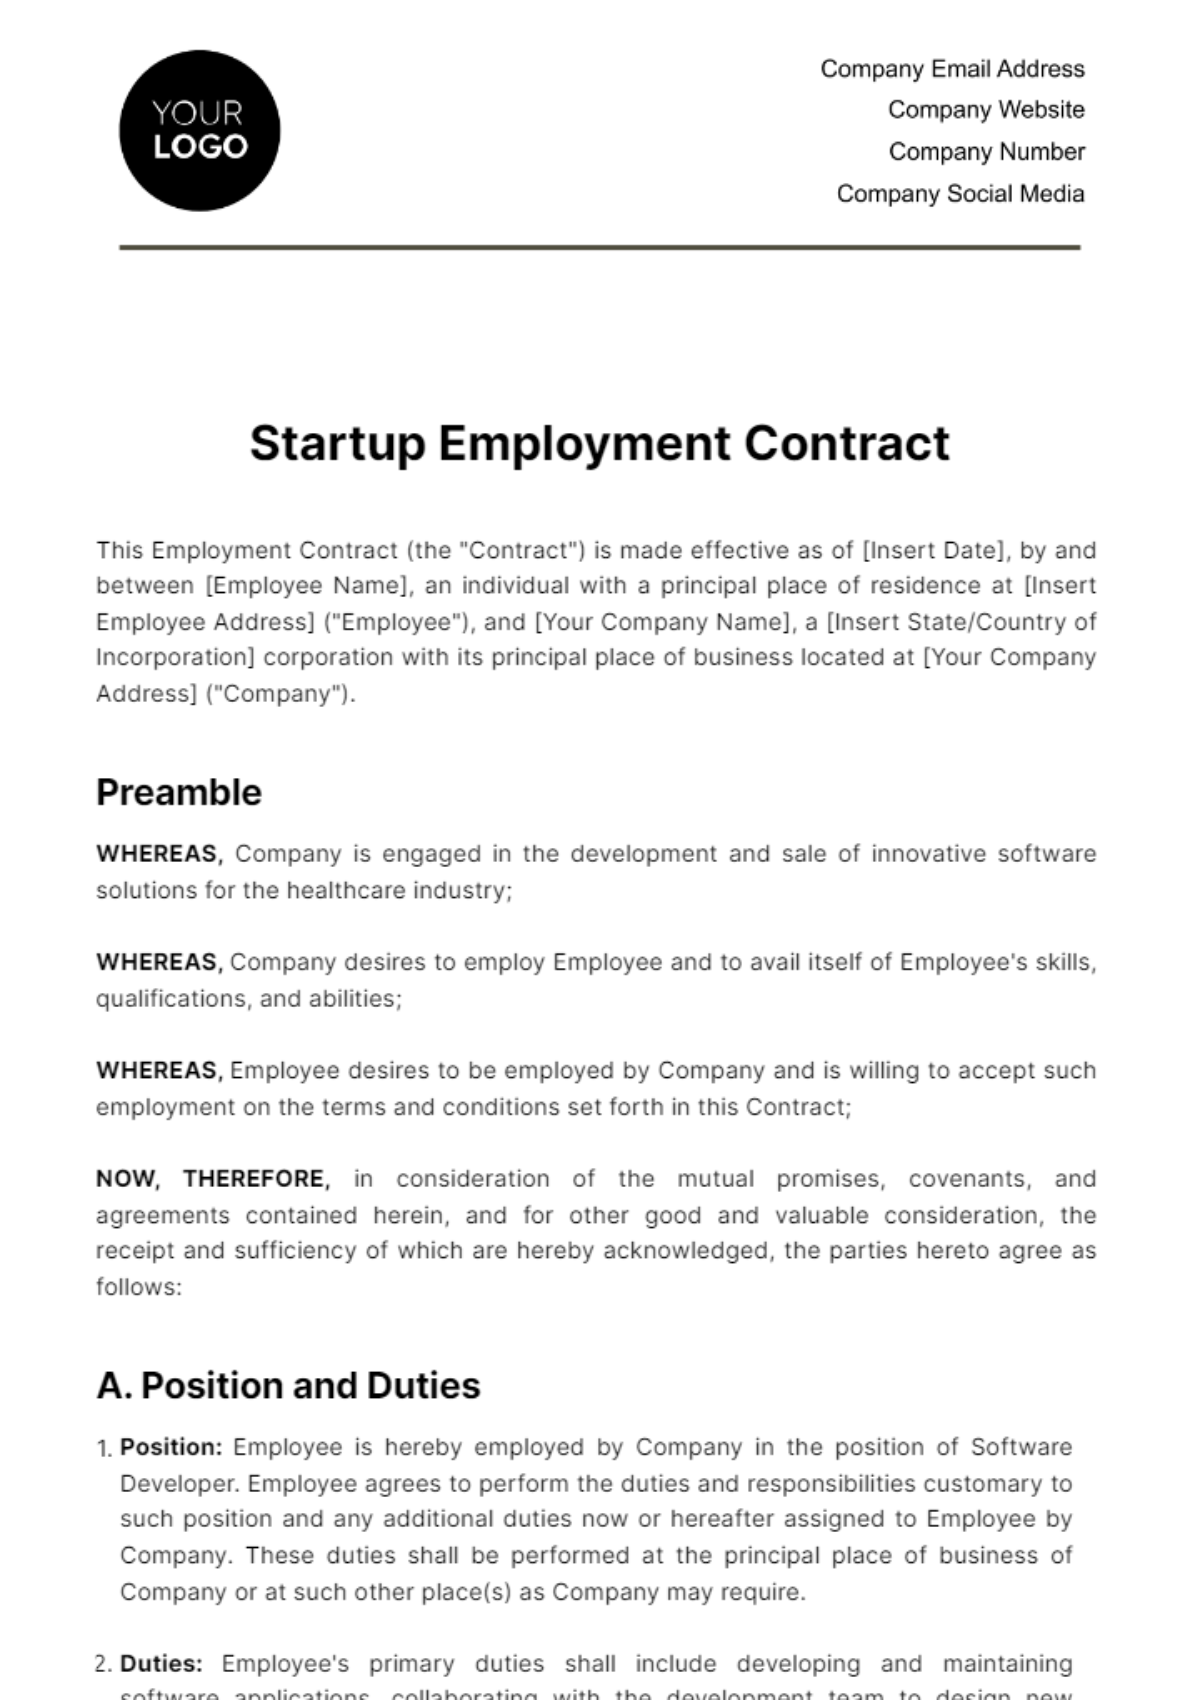 Free Startup Employment Contract Template